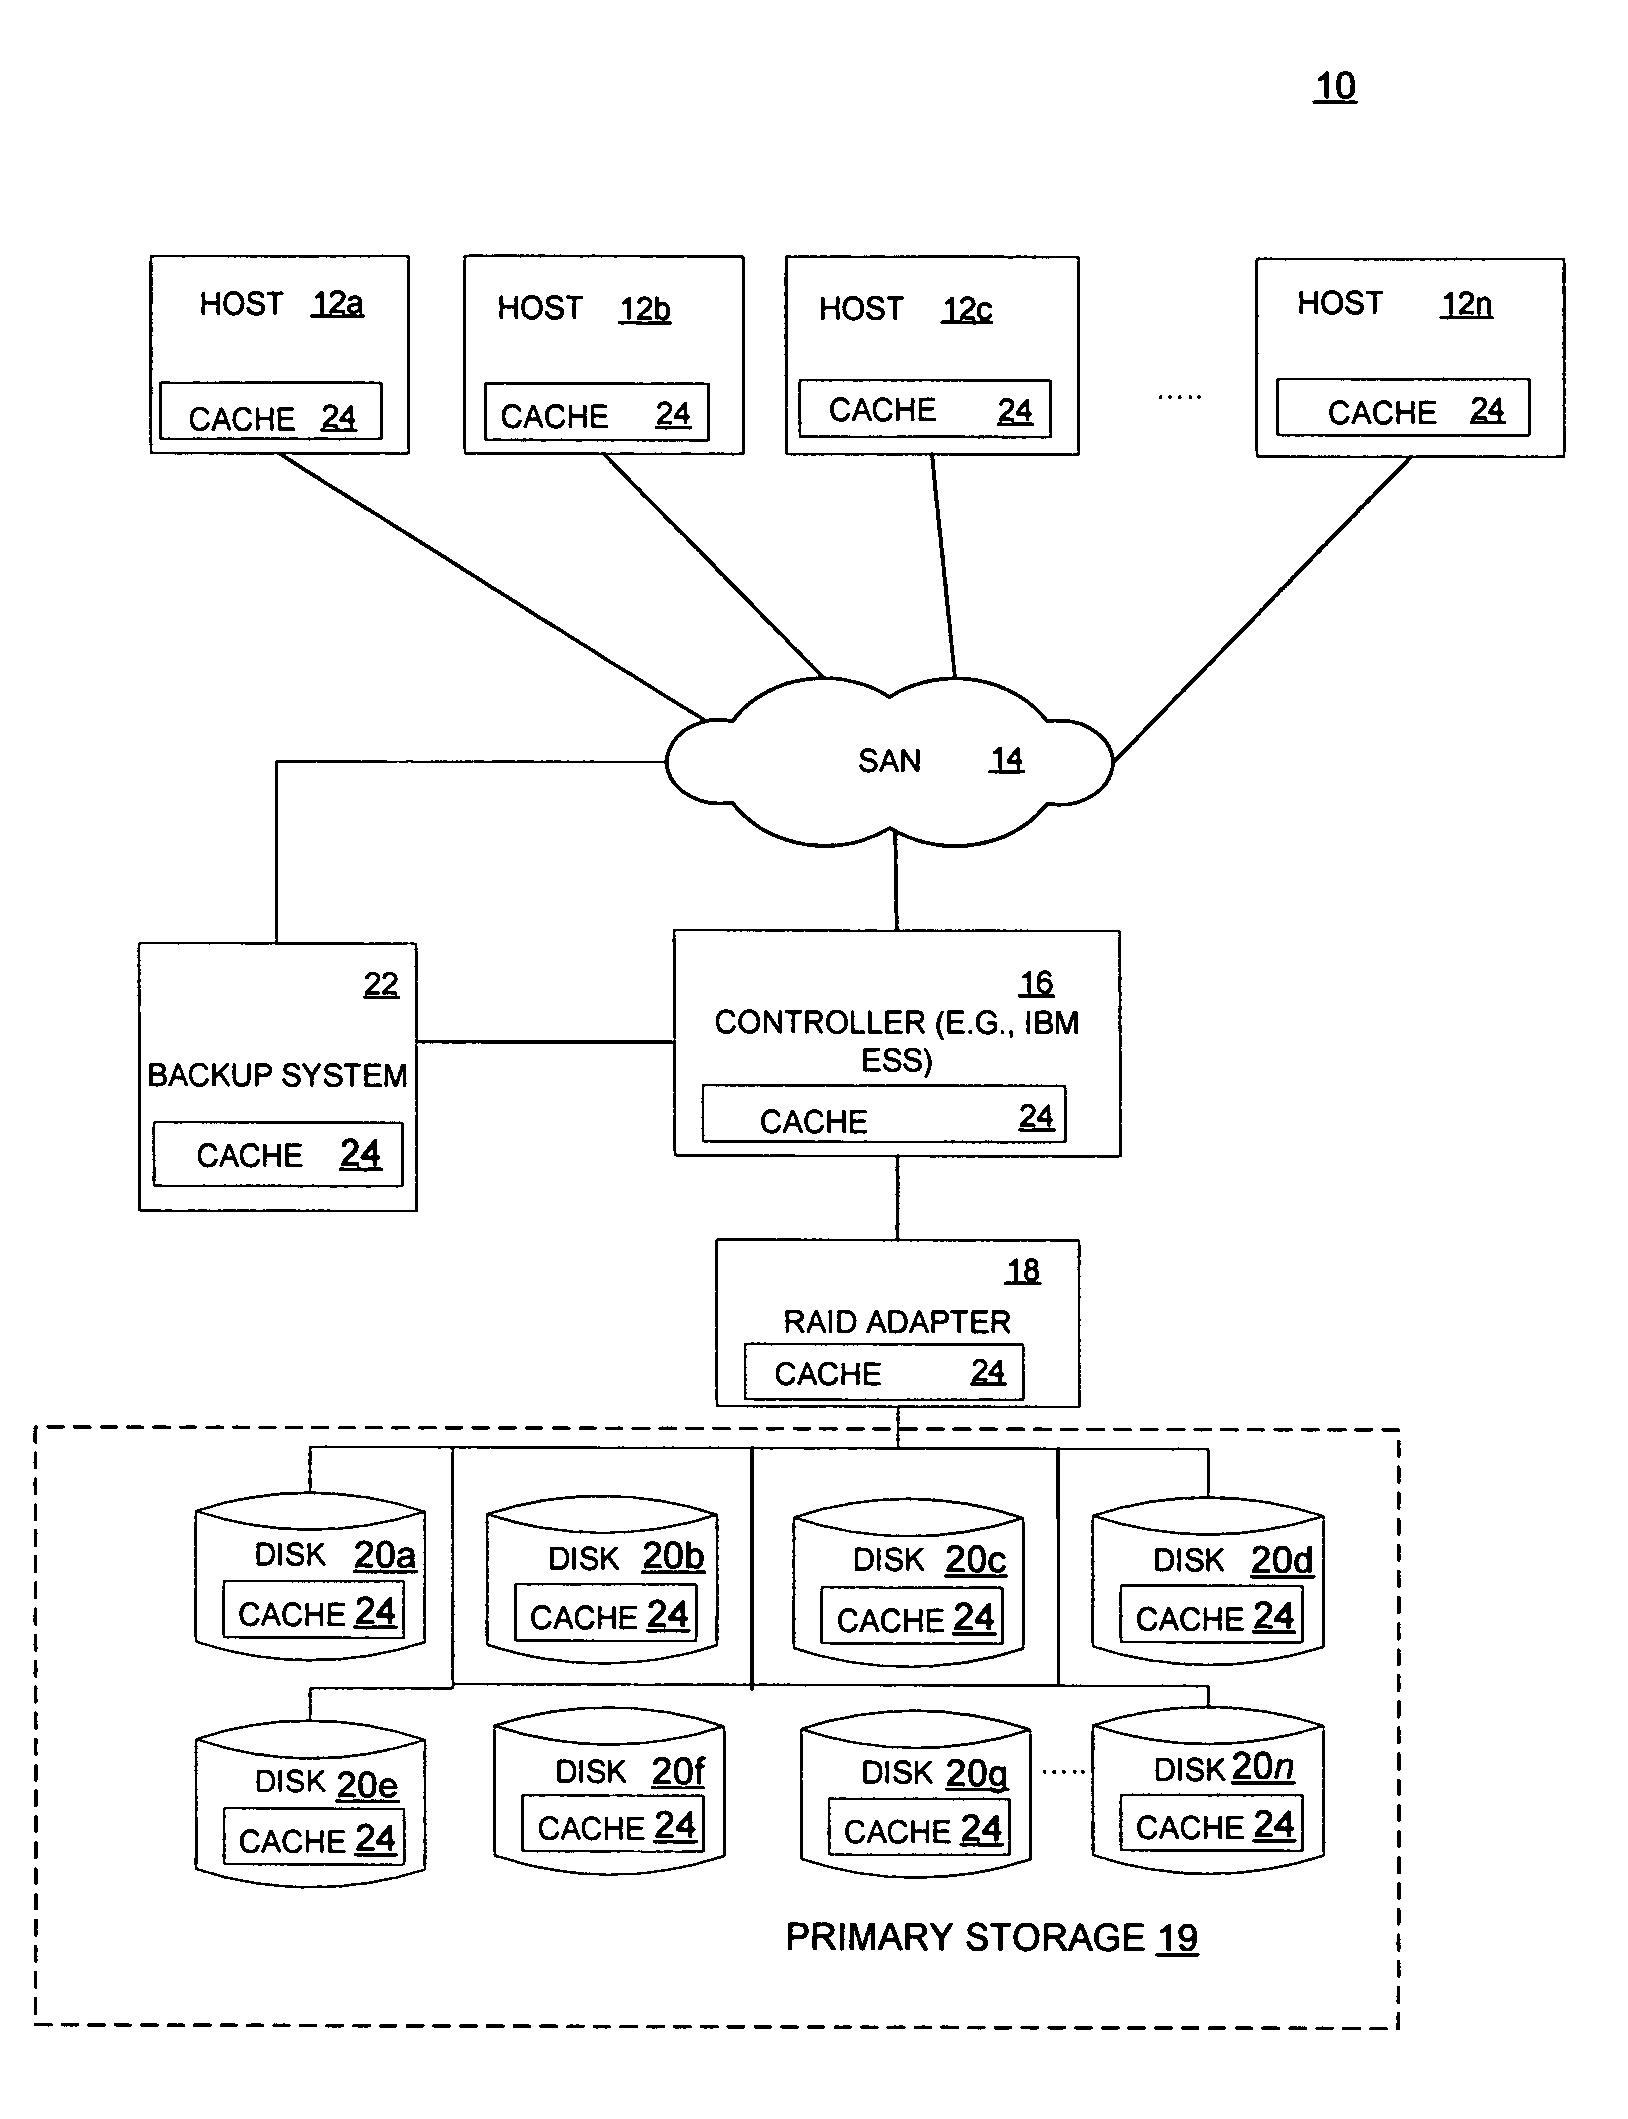 Method for reducing data loss and unavailability by integrating multiple levels of a storage hierarchy